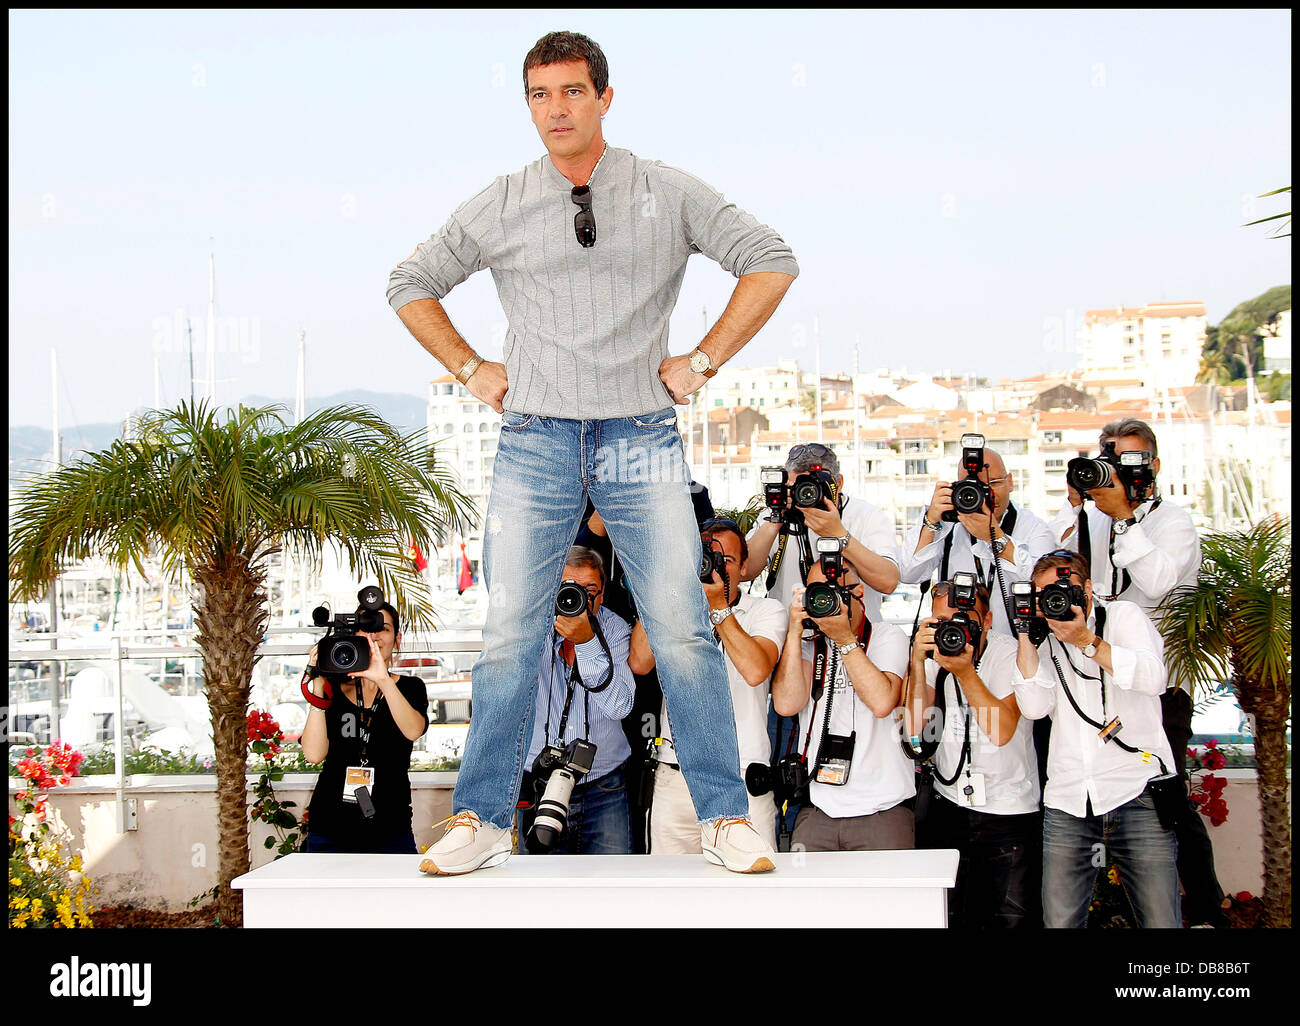 Antonio Banderas 2011 Cannes International Film Festival - Day 9 -The Skin I Live In - Photocall Cannes, France - 19.05.11 Stock Photo